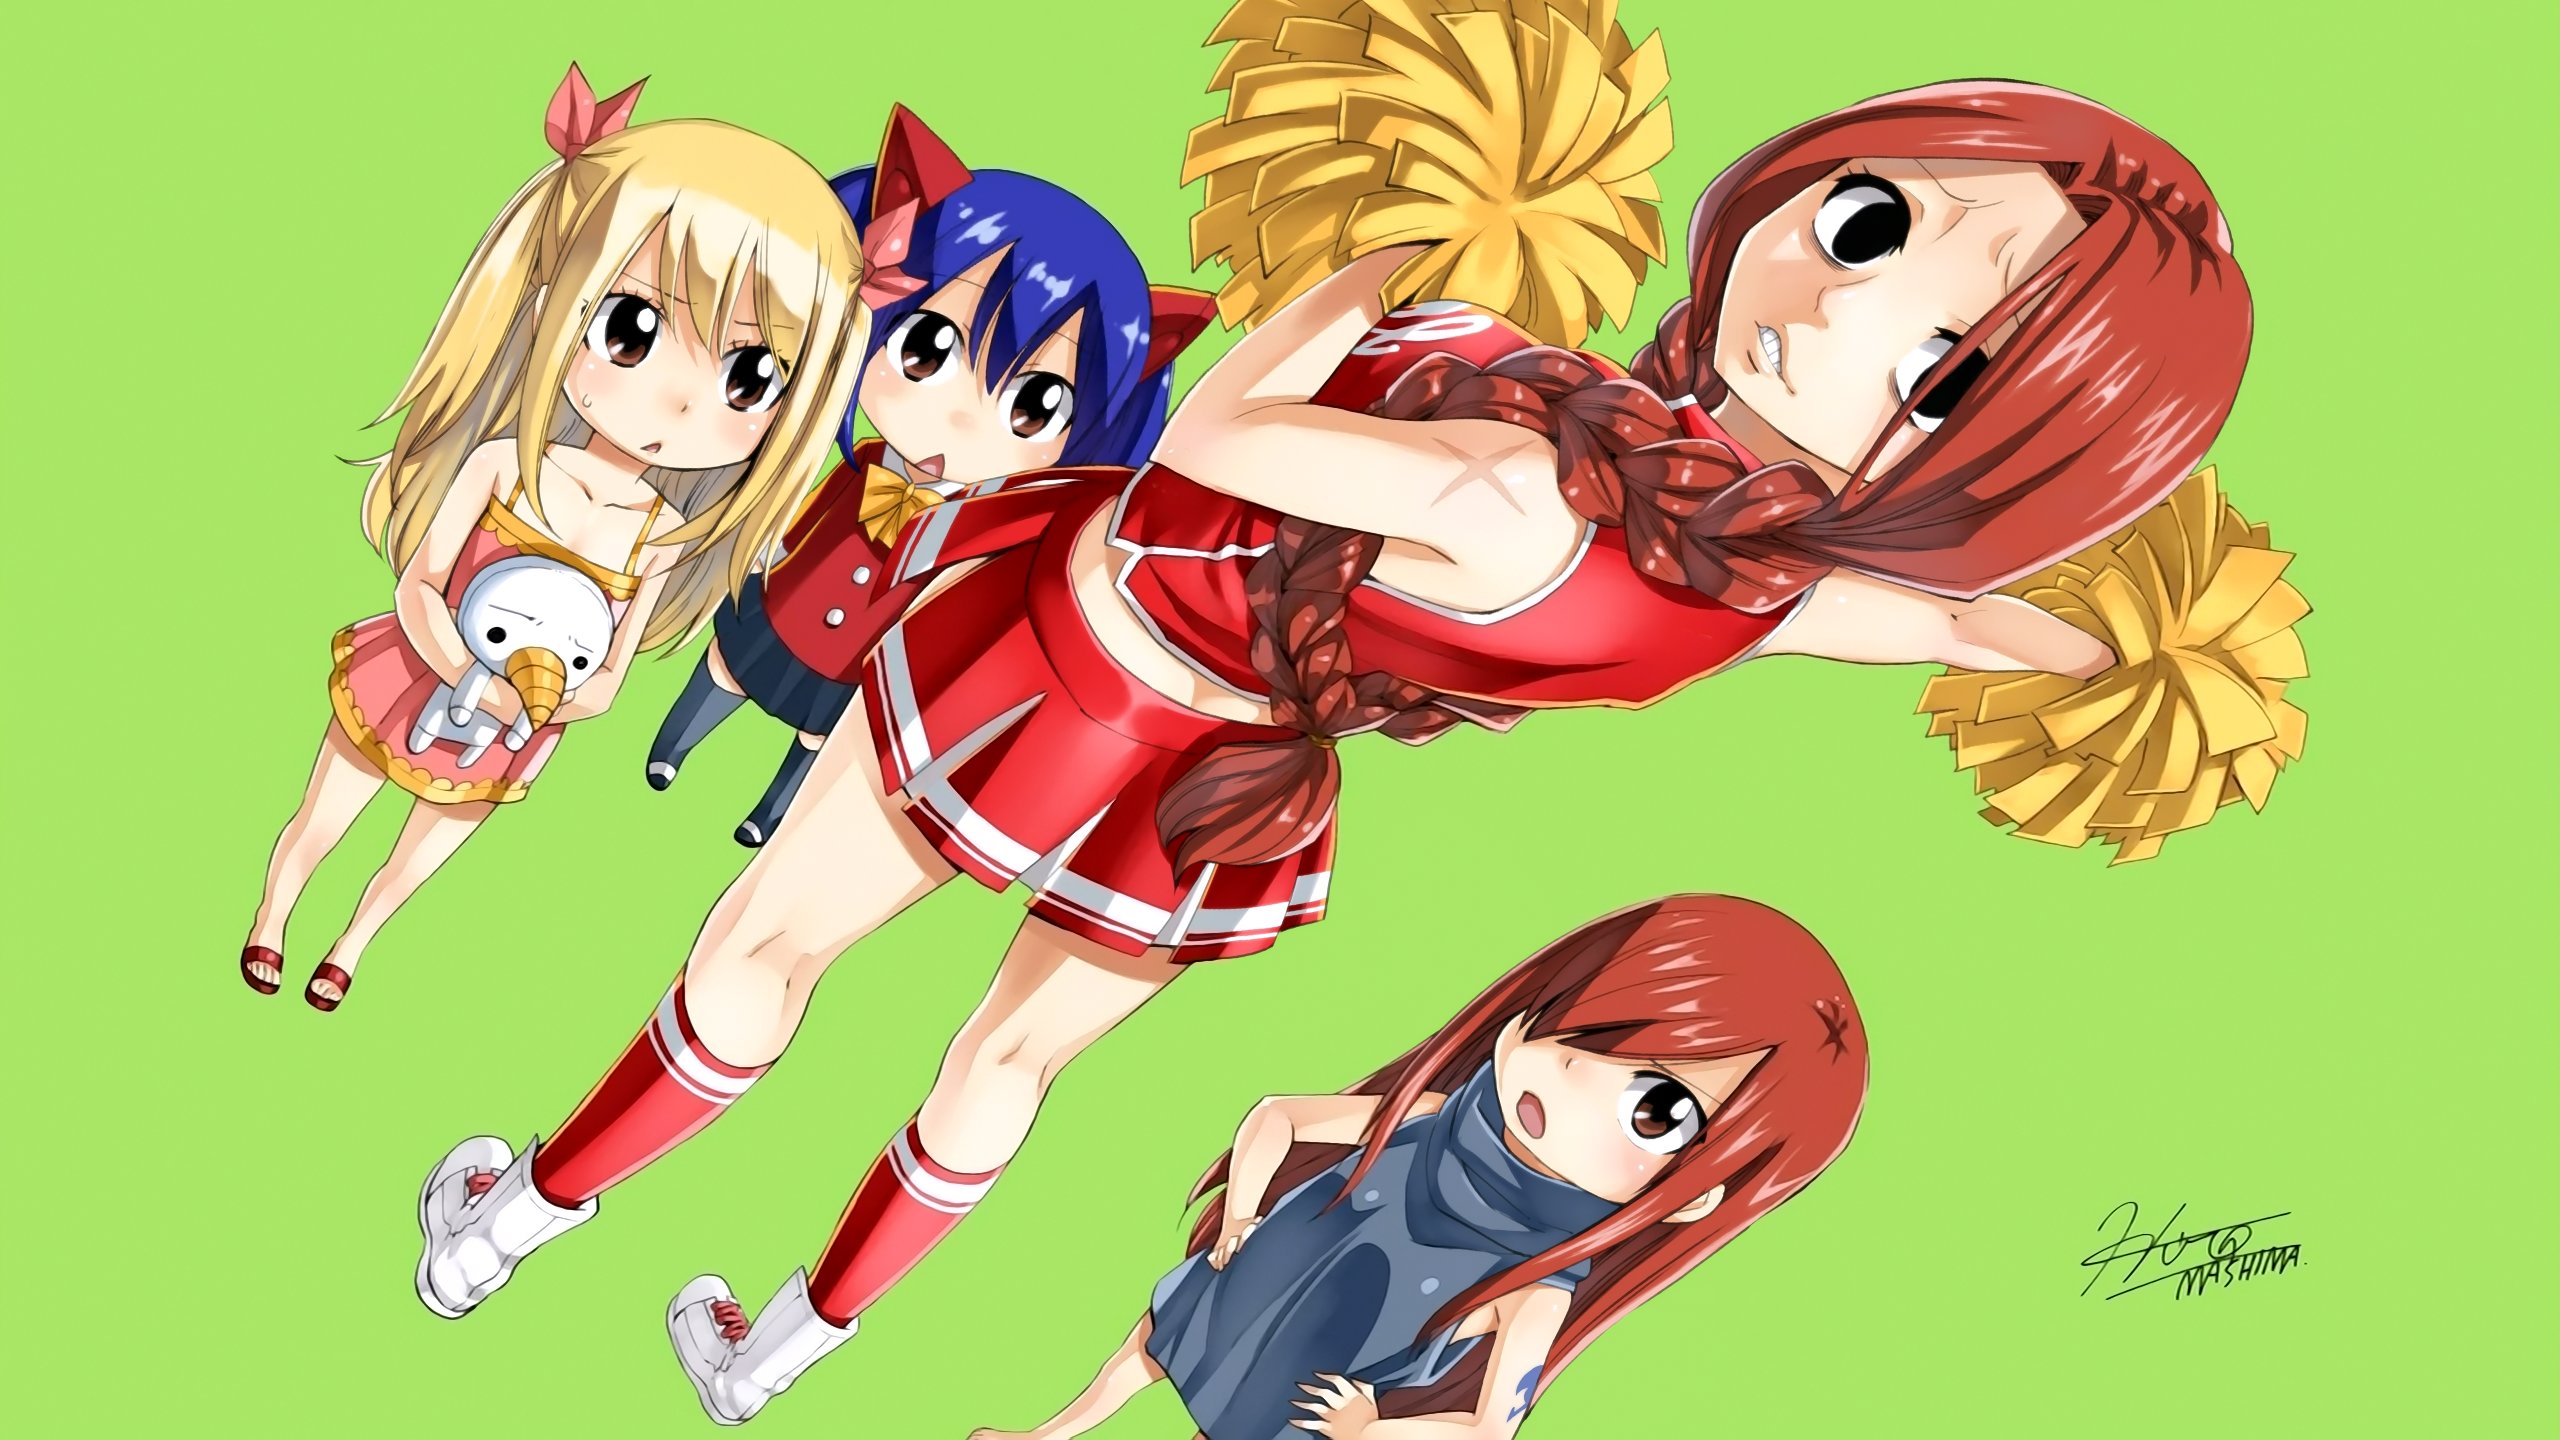 Erza Scarlet Flare Corona Lucy Heartfilia Plue Fairy Tail Wendy Marvell 2560x1440